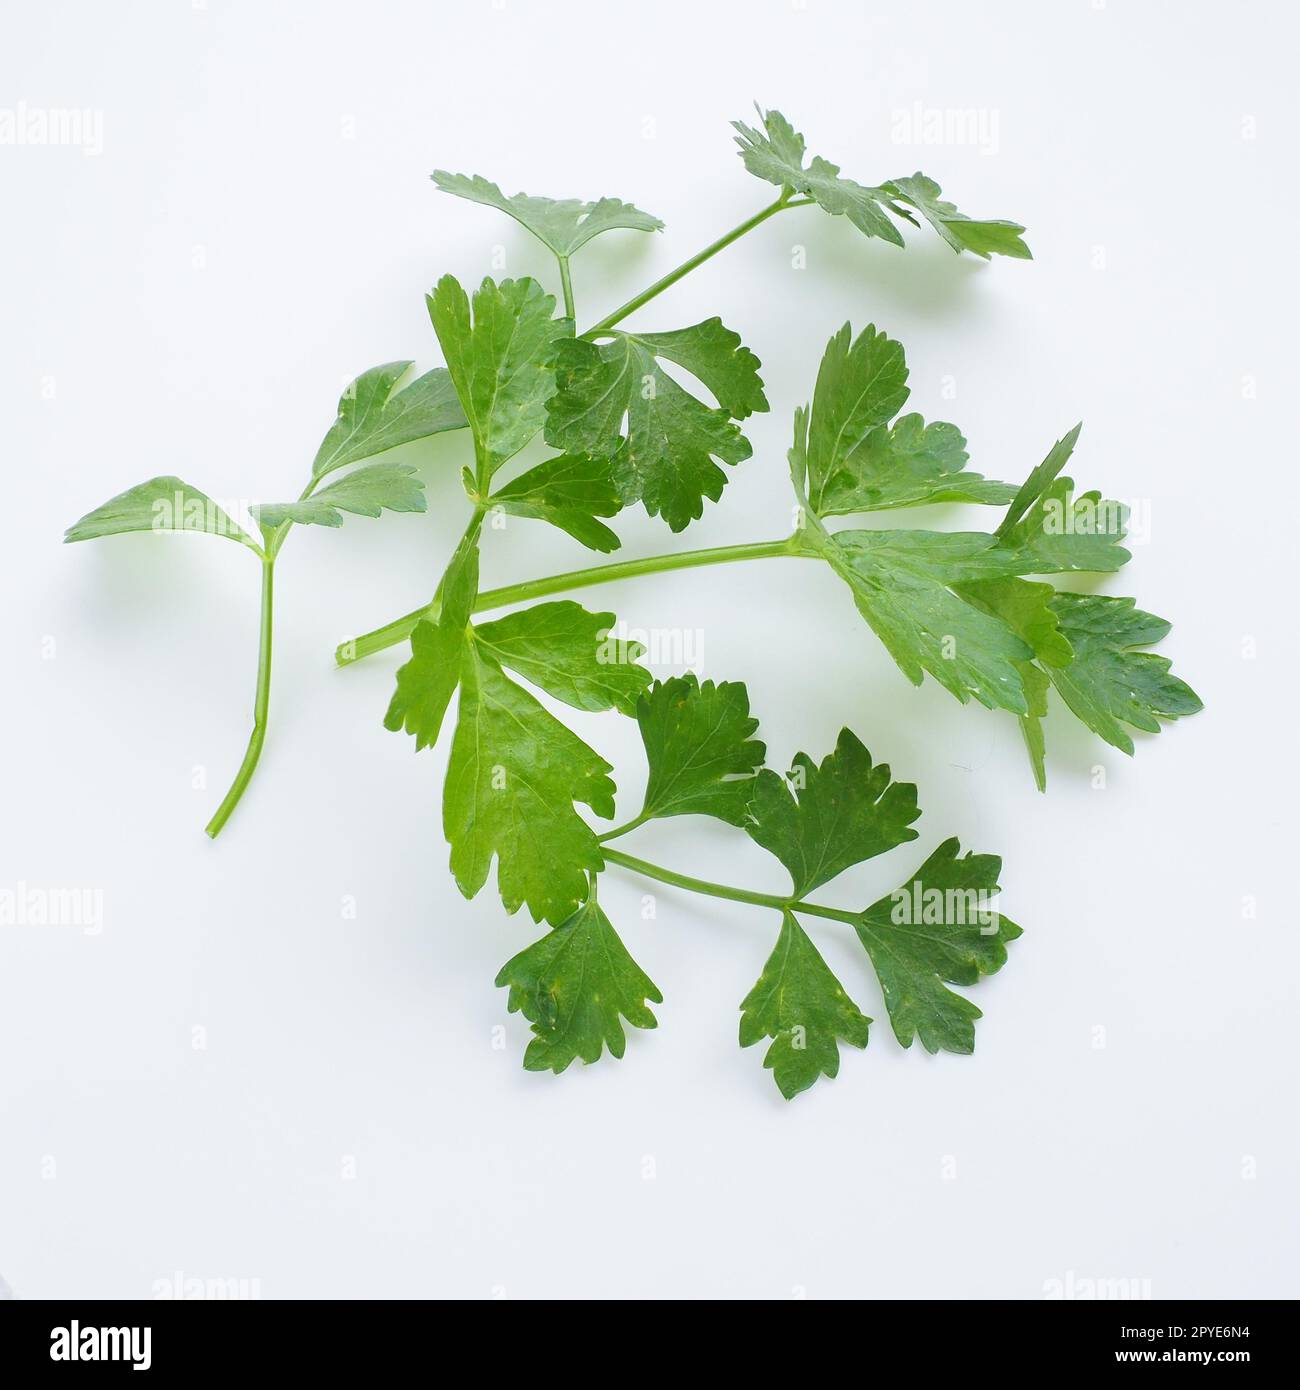 Petroselinum crispum, one- to two-year-old plant umbrella family Umbelliferae. Celery odorous, or Celery fragrant Apium graveolens is a biennial plant Apiaceae, a vegetable crop. White background. Stock Photo